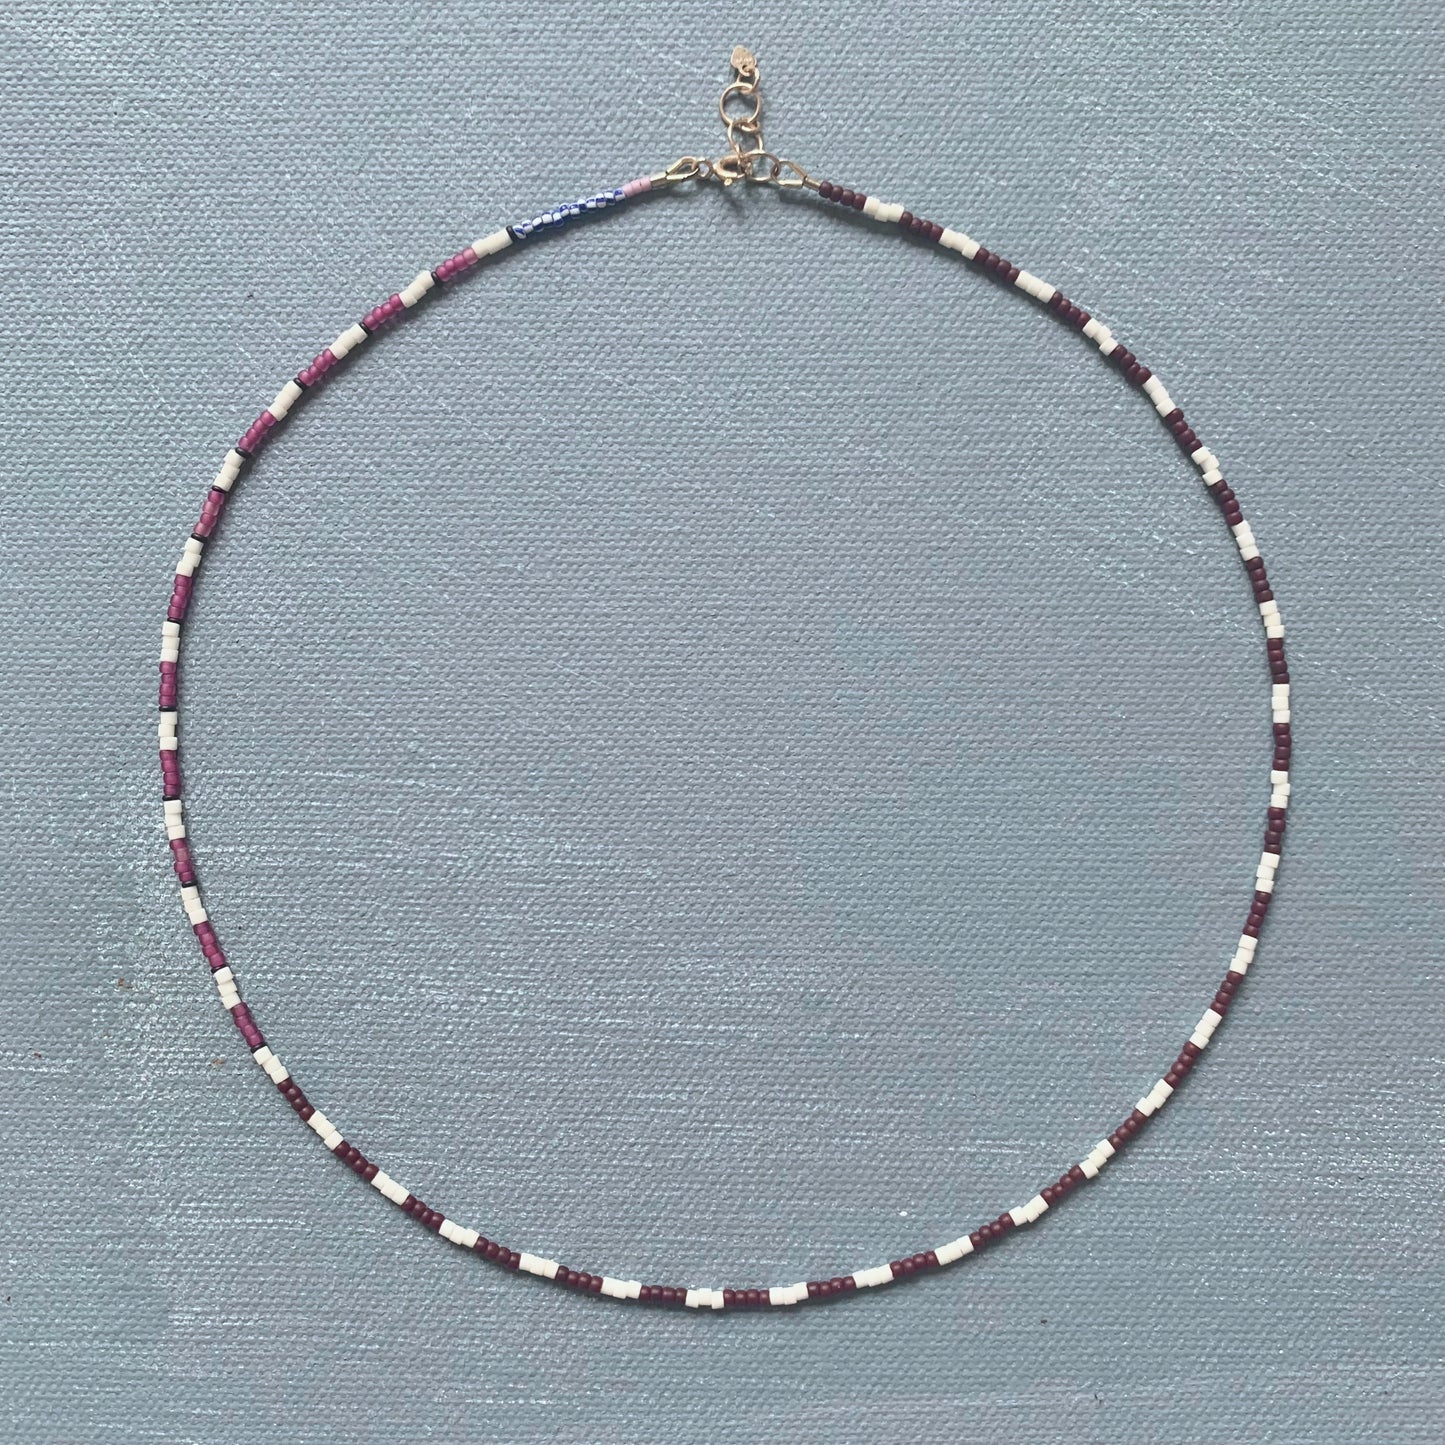 necklace in stripe no. 1